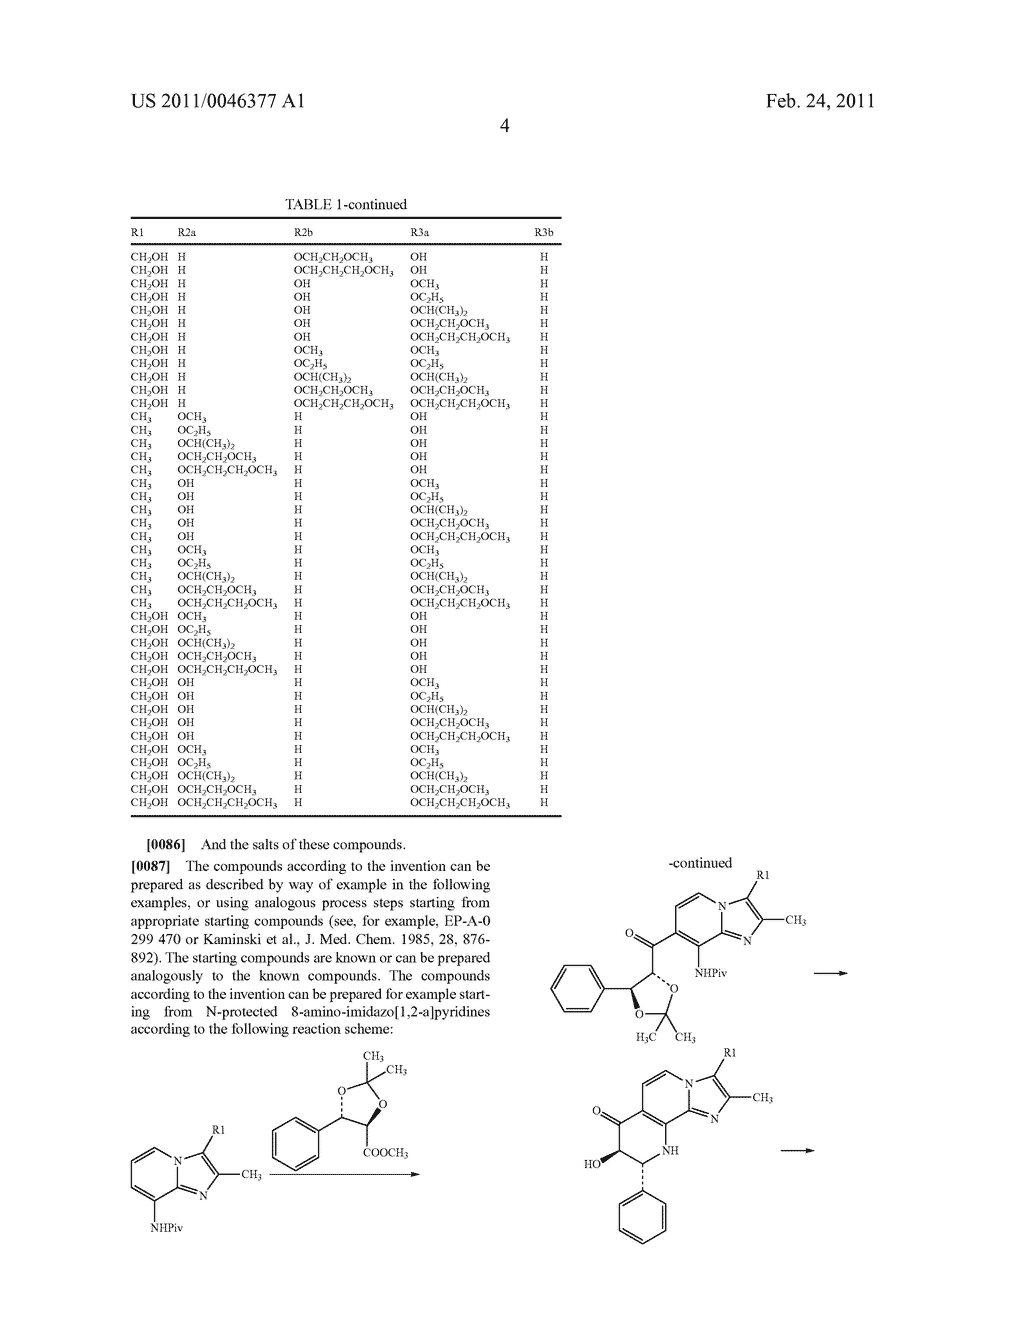 TETRAHYDROPYRIDOETHERS FOR TREATMENT OF AMD - diagram, schematic, and image 27